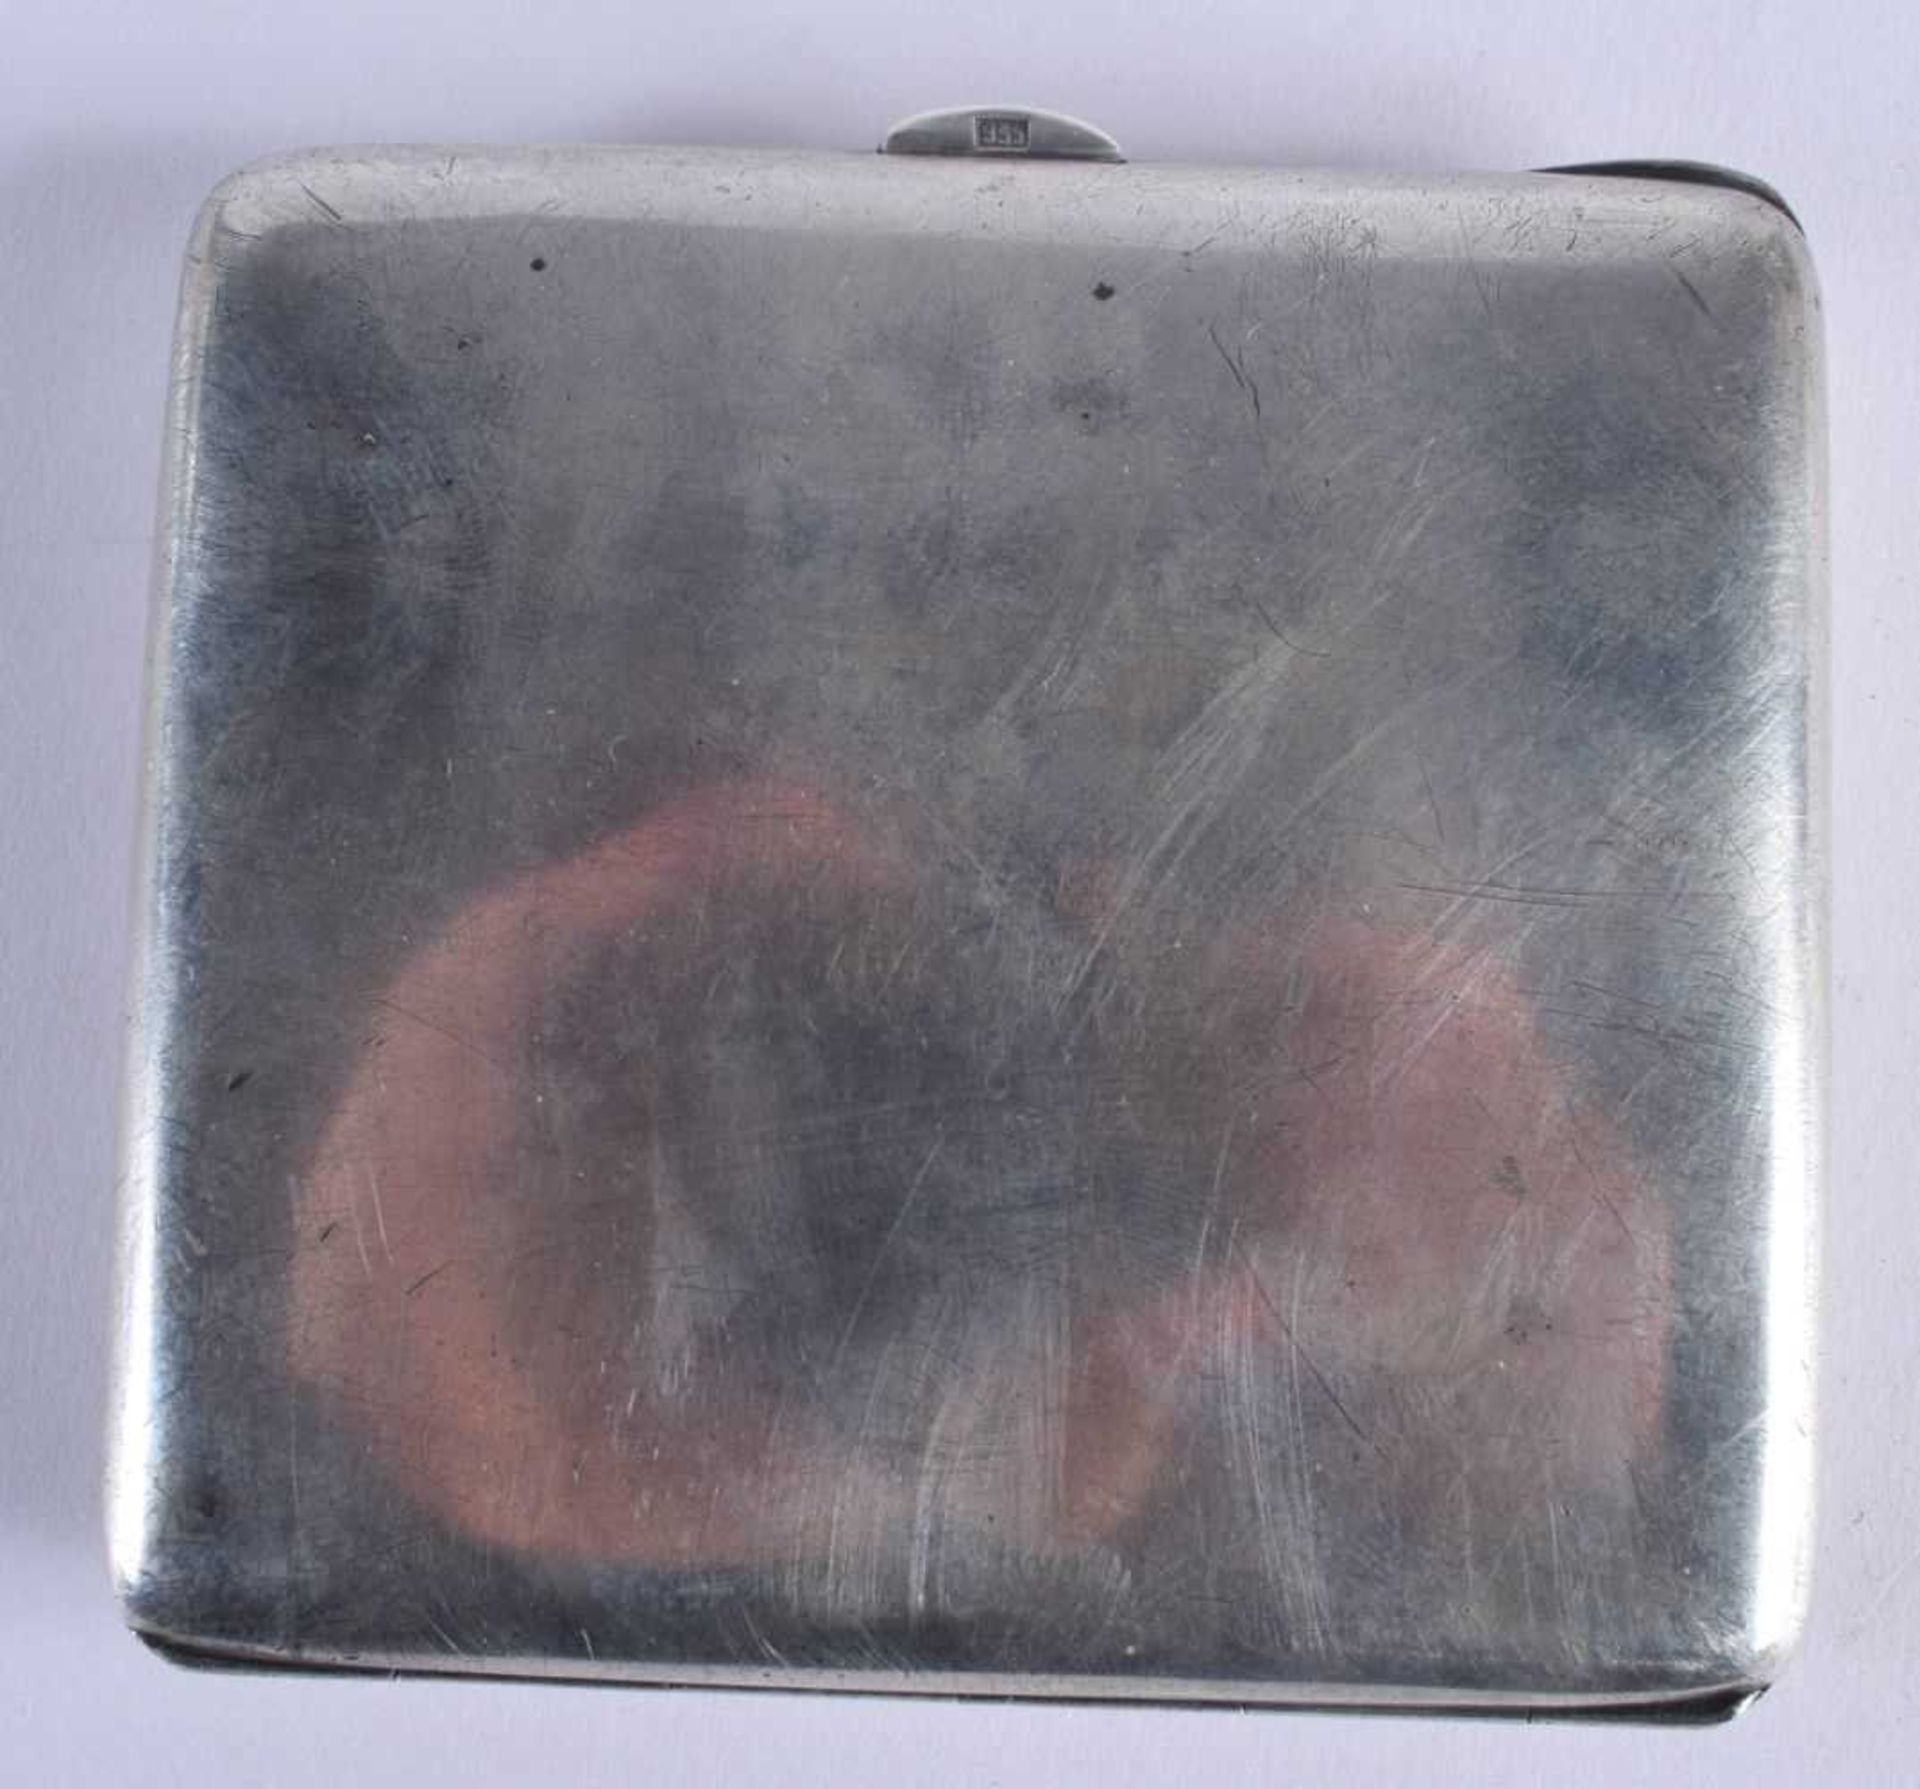 AN ART DECO SILVER AND ENAMEL CIGARETTE CASE painted with a Middle Eastern male revealing a nude - Image 6 of 7